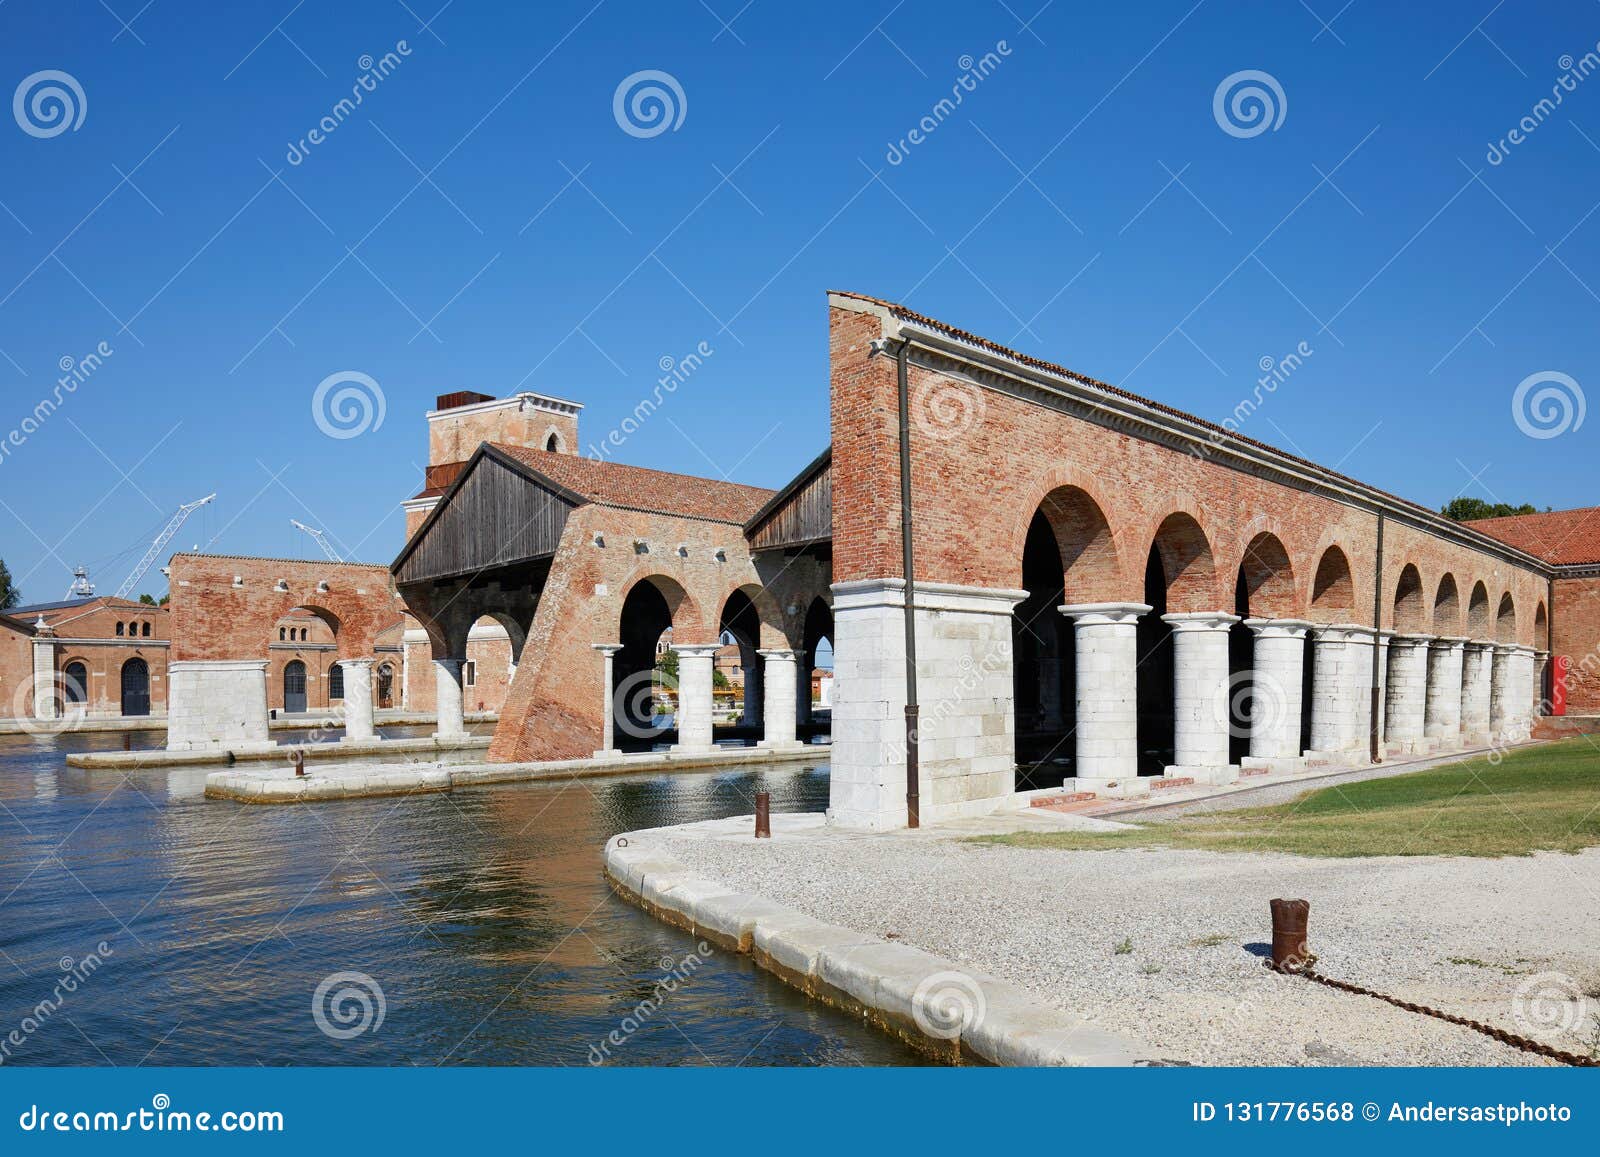 venetian arsenal with docks and arcade in venice, italy